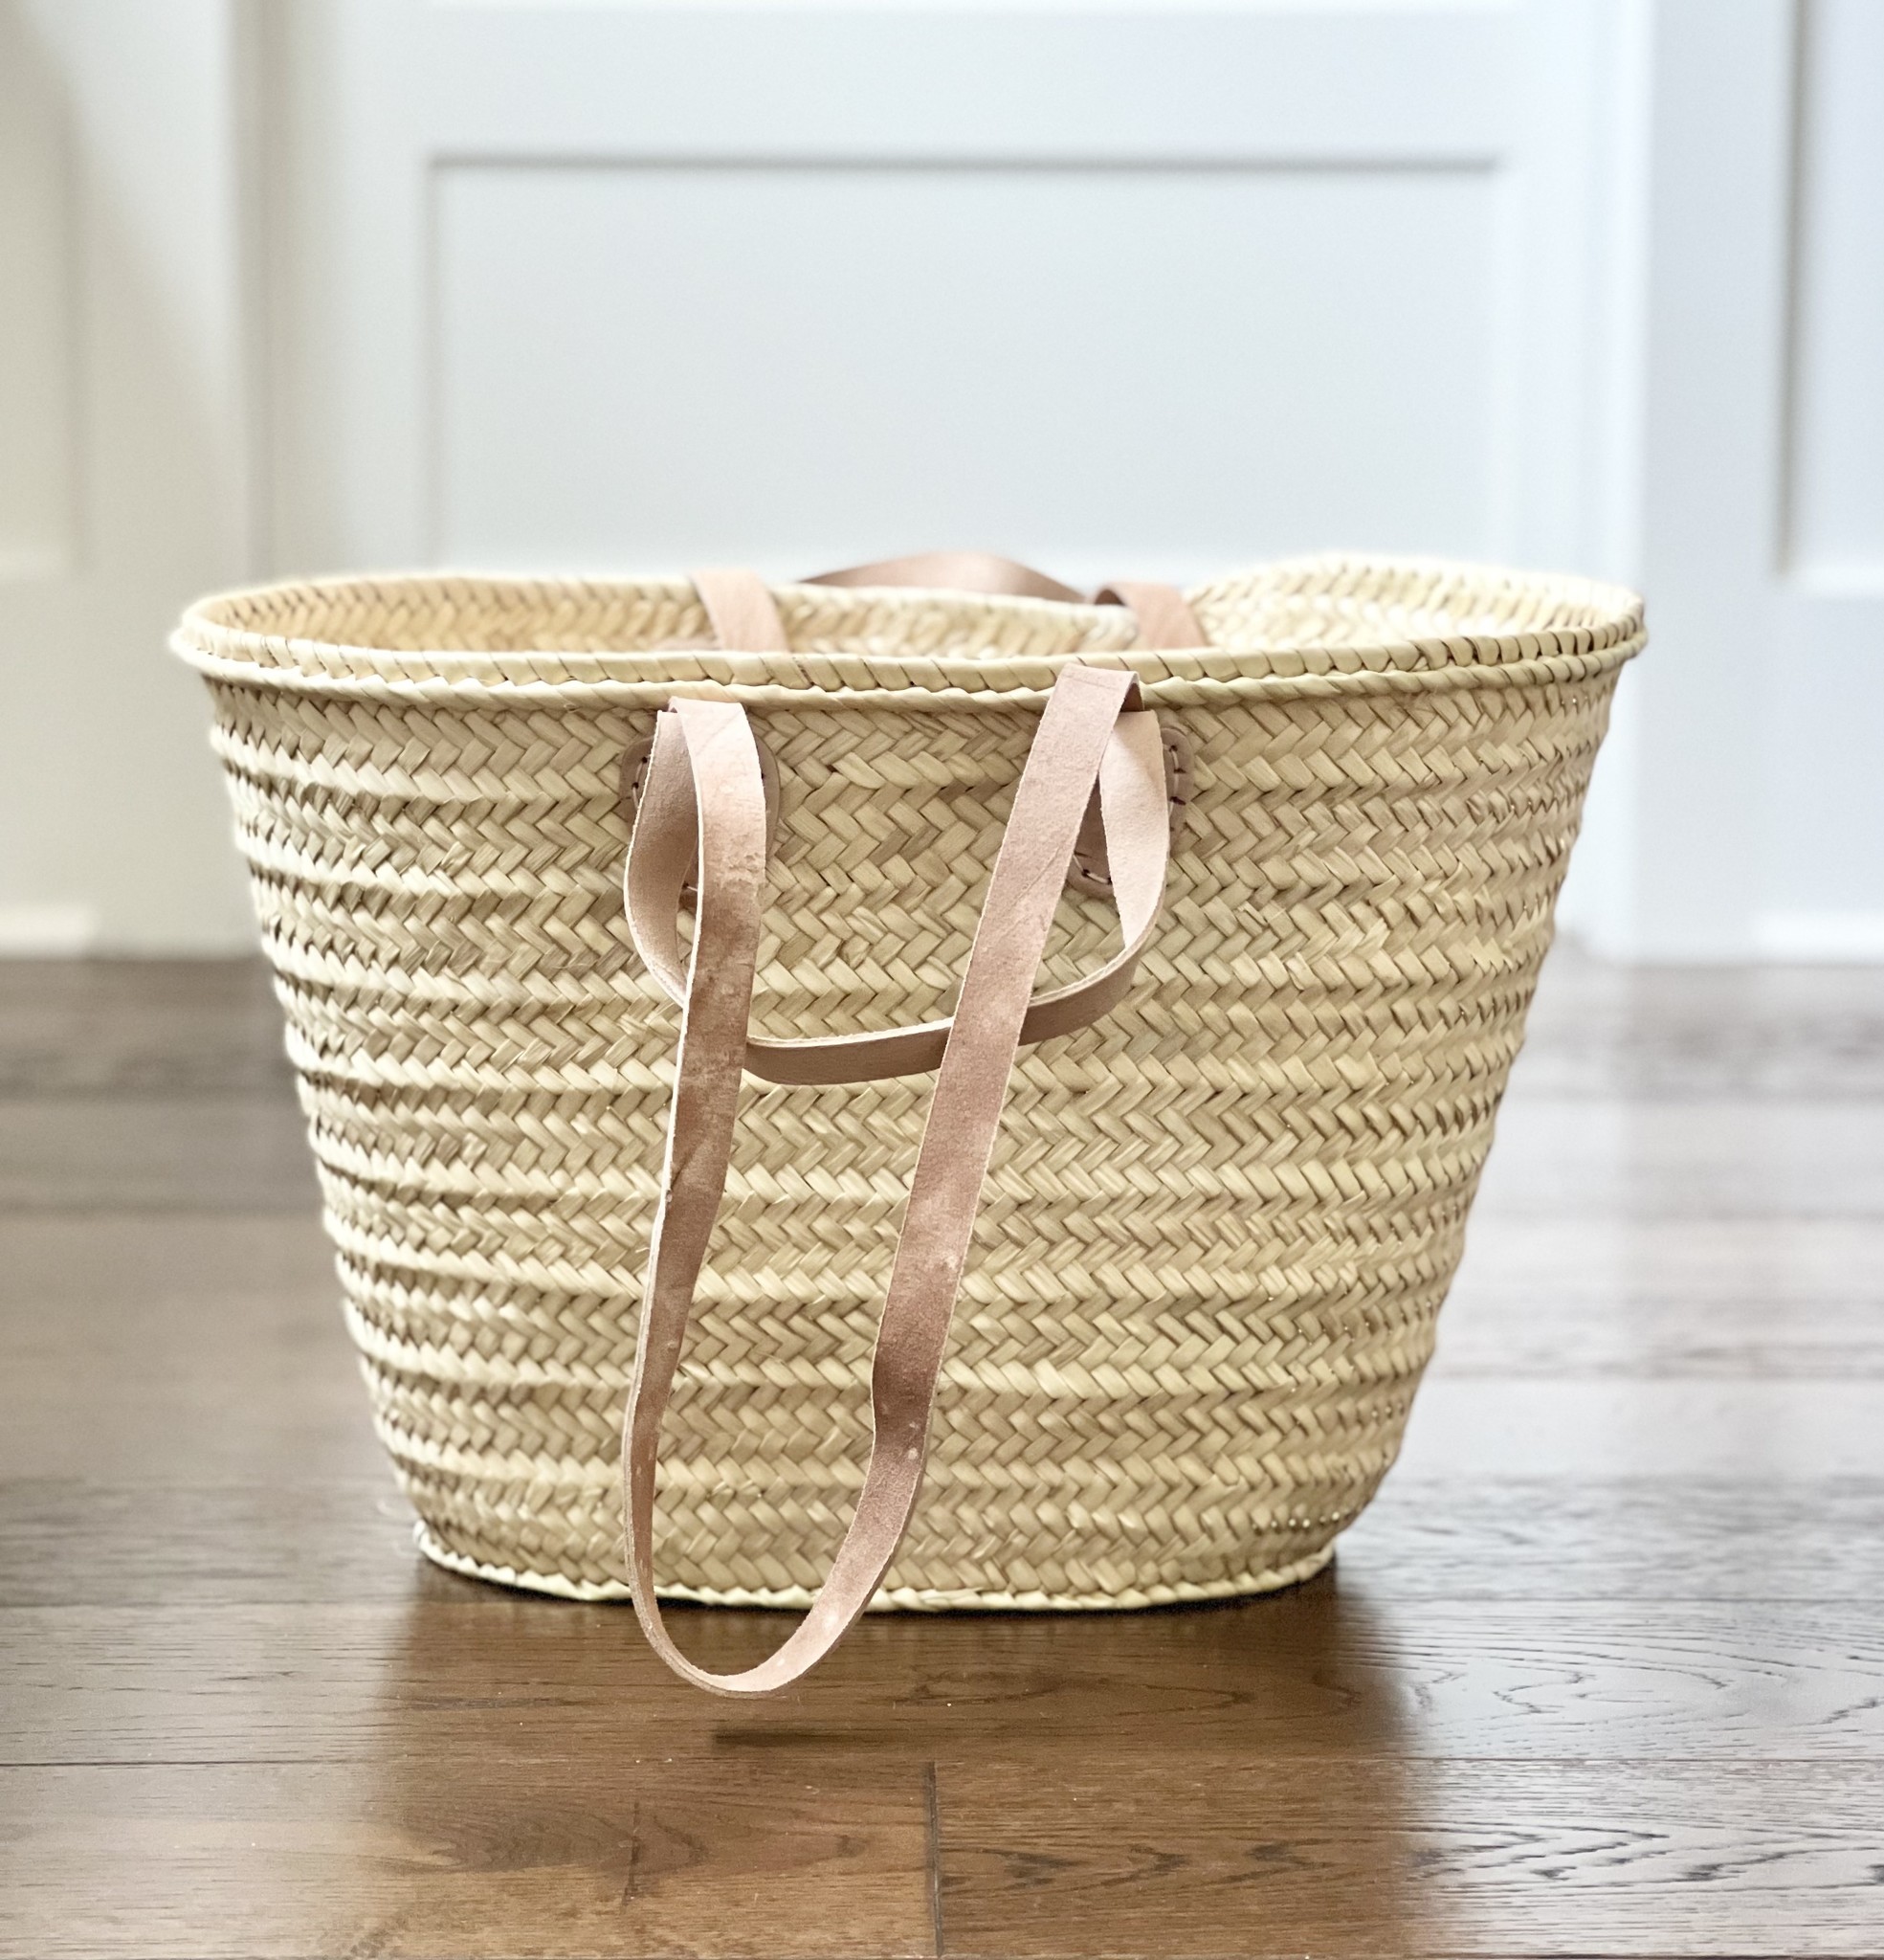 Large French Market Shopping Basket Woven Palm Leather Handles Chic Storage Bag 